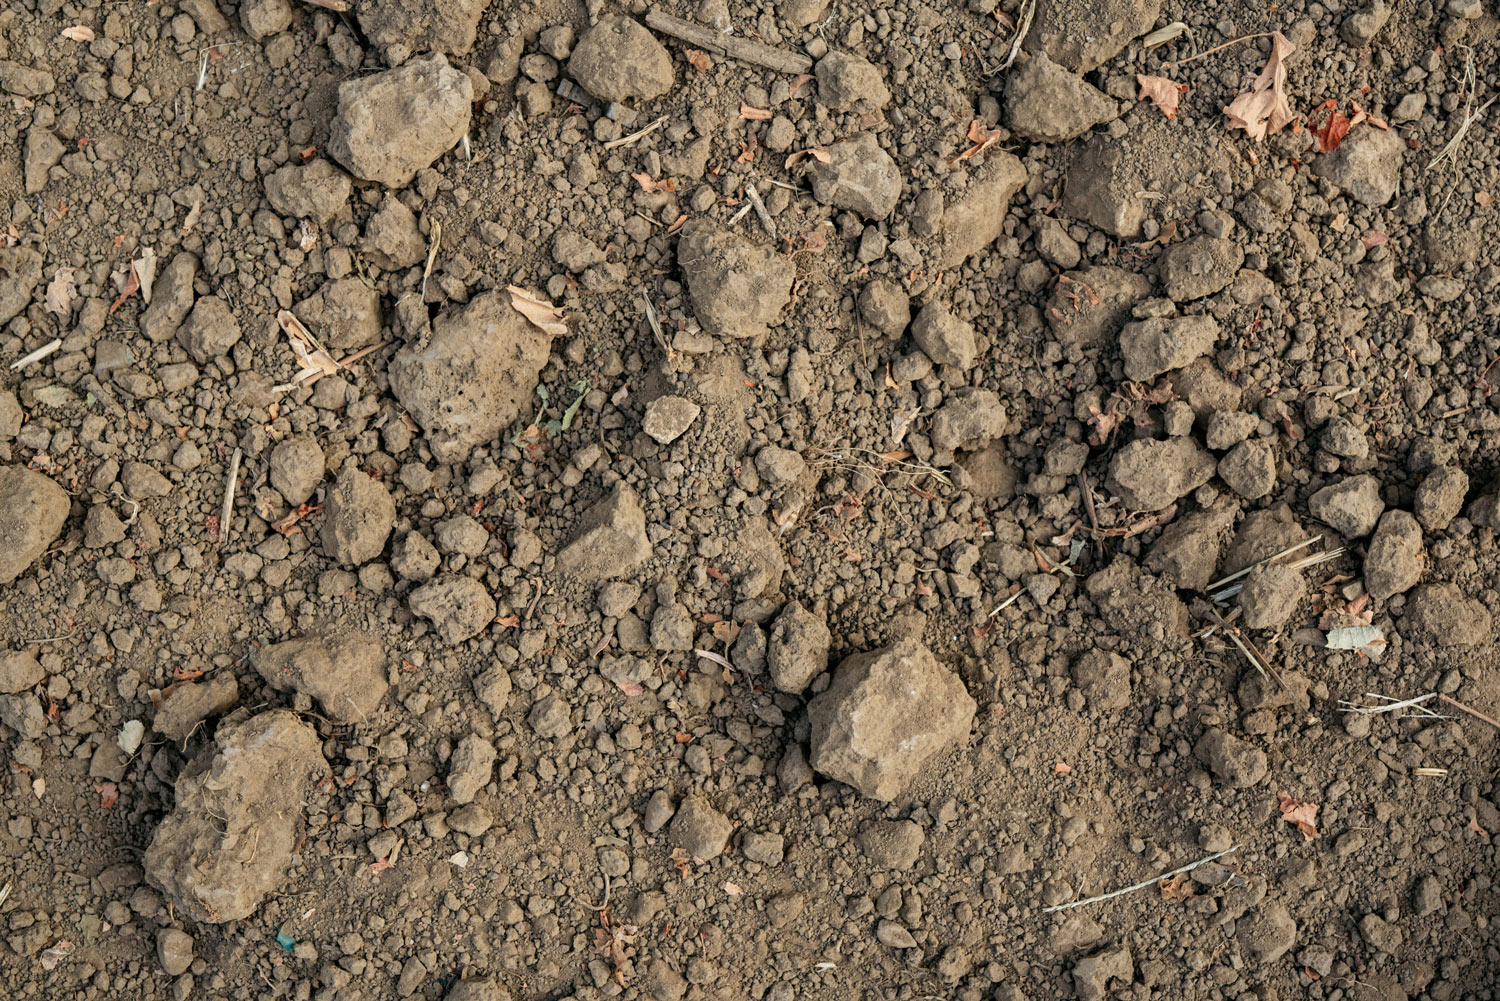 Close-up of the soil and rocks in the Trailside Vineyard